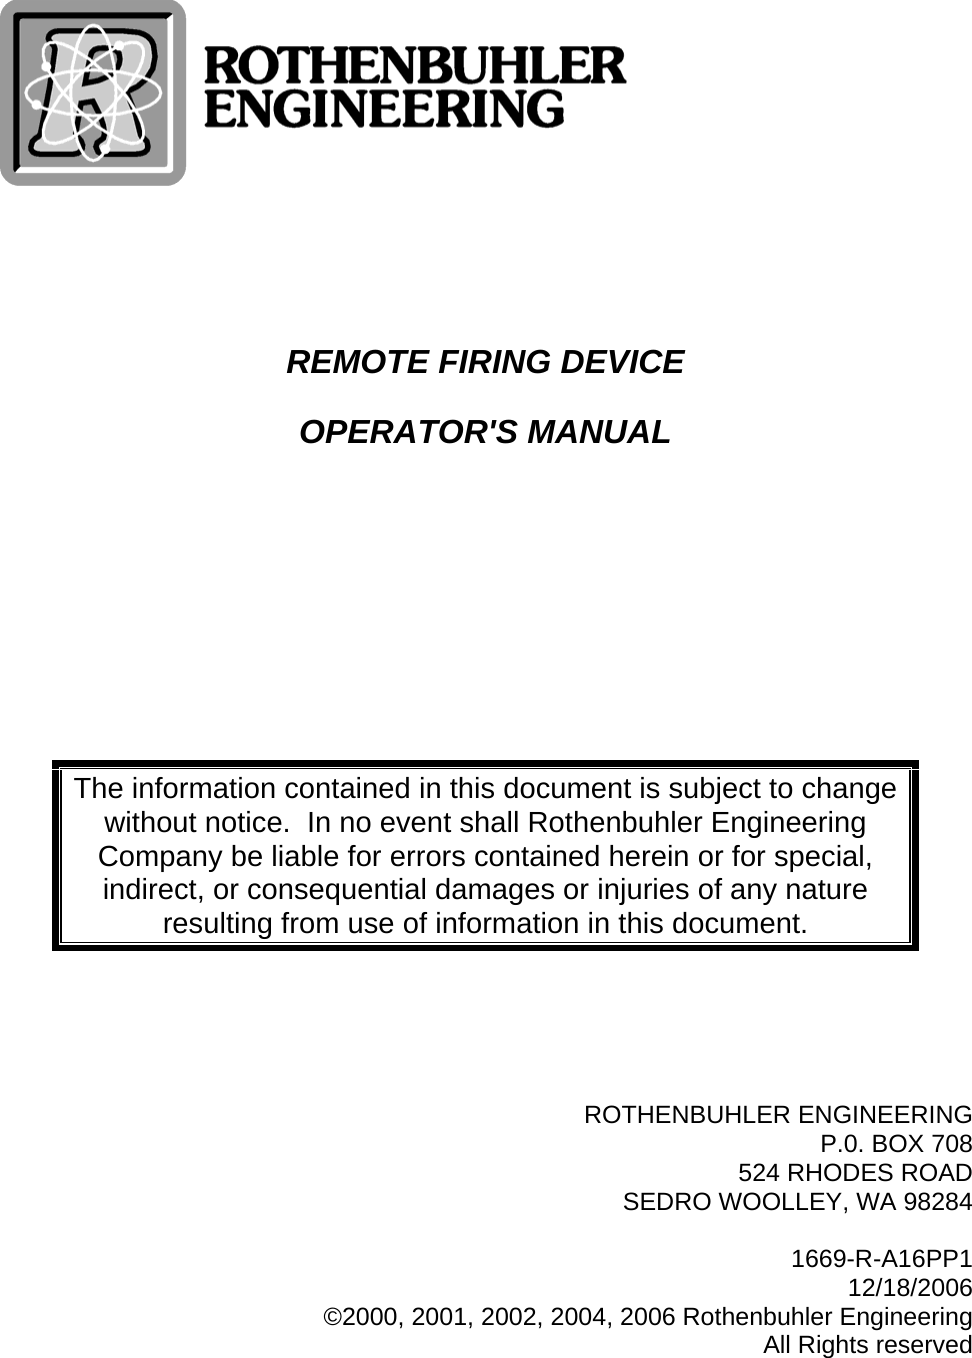    REMOTE FIRING DEVICE OPERATOR&apos;S MANUAL     The information contained in this document is subject to change without notice.  In no event shall Rothenbuhler Engineering Company be liable for errors contained herein or for special, indirect, or consequential damages or injuries of any nature resulting from use of information in this document.      ROTHENBUHLER ENGINEERING P.0. BOX 708 524 RHODES ROAD SEDRO WOOLLEY, WA 98284  1669-R-A16PP1 12/18/2006 ©2000, 2001, 2002, 2004, 2006 Rothenbuhler Engineering All Rights reserved 